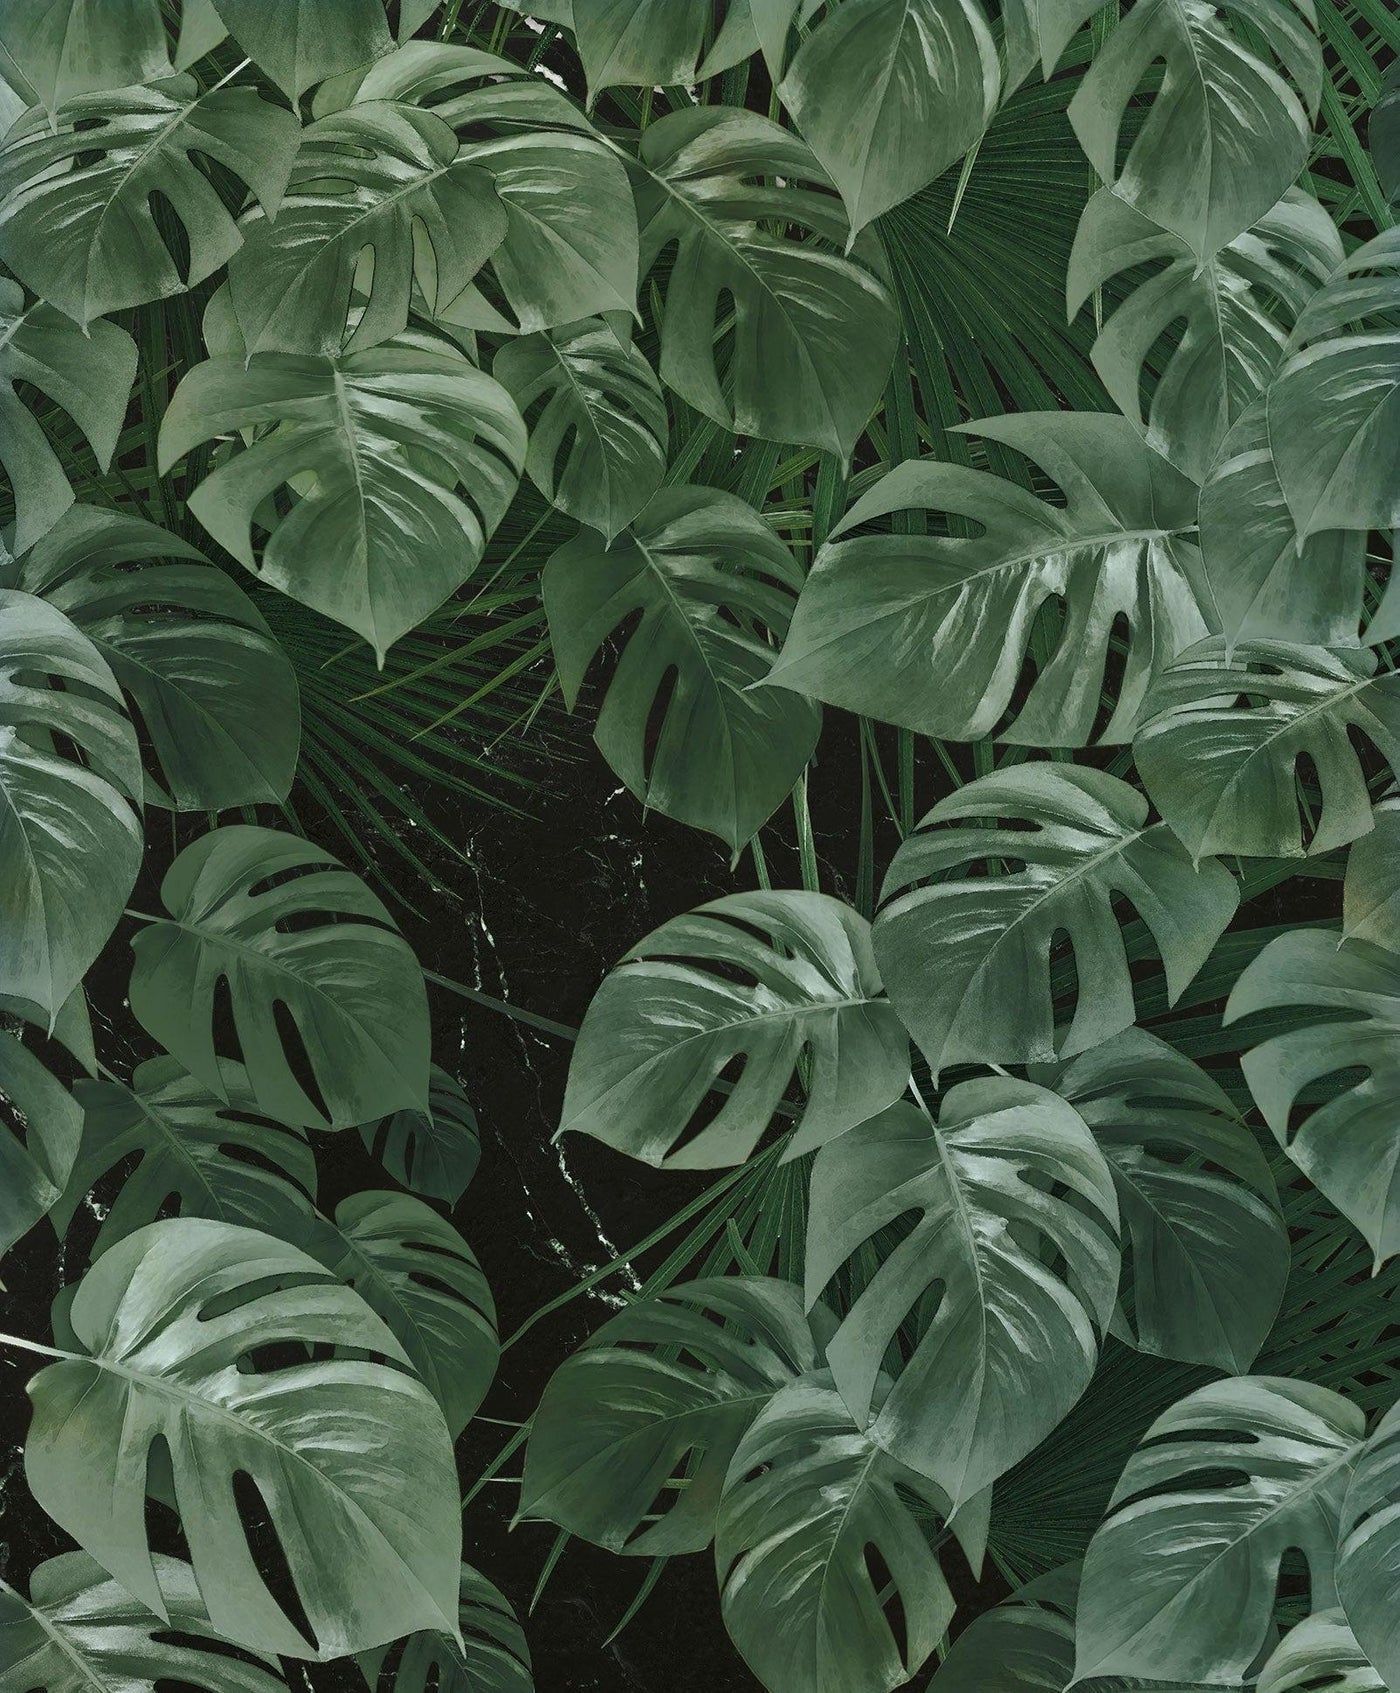 A wall mural with a monstera leaf pattern - Monstera, garden